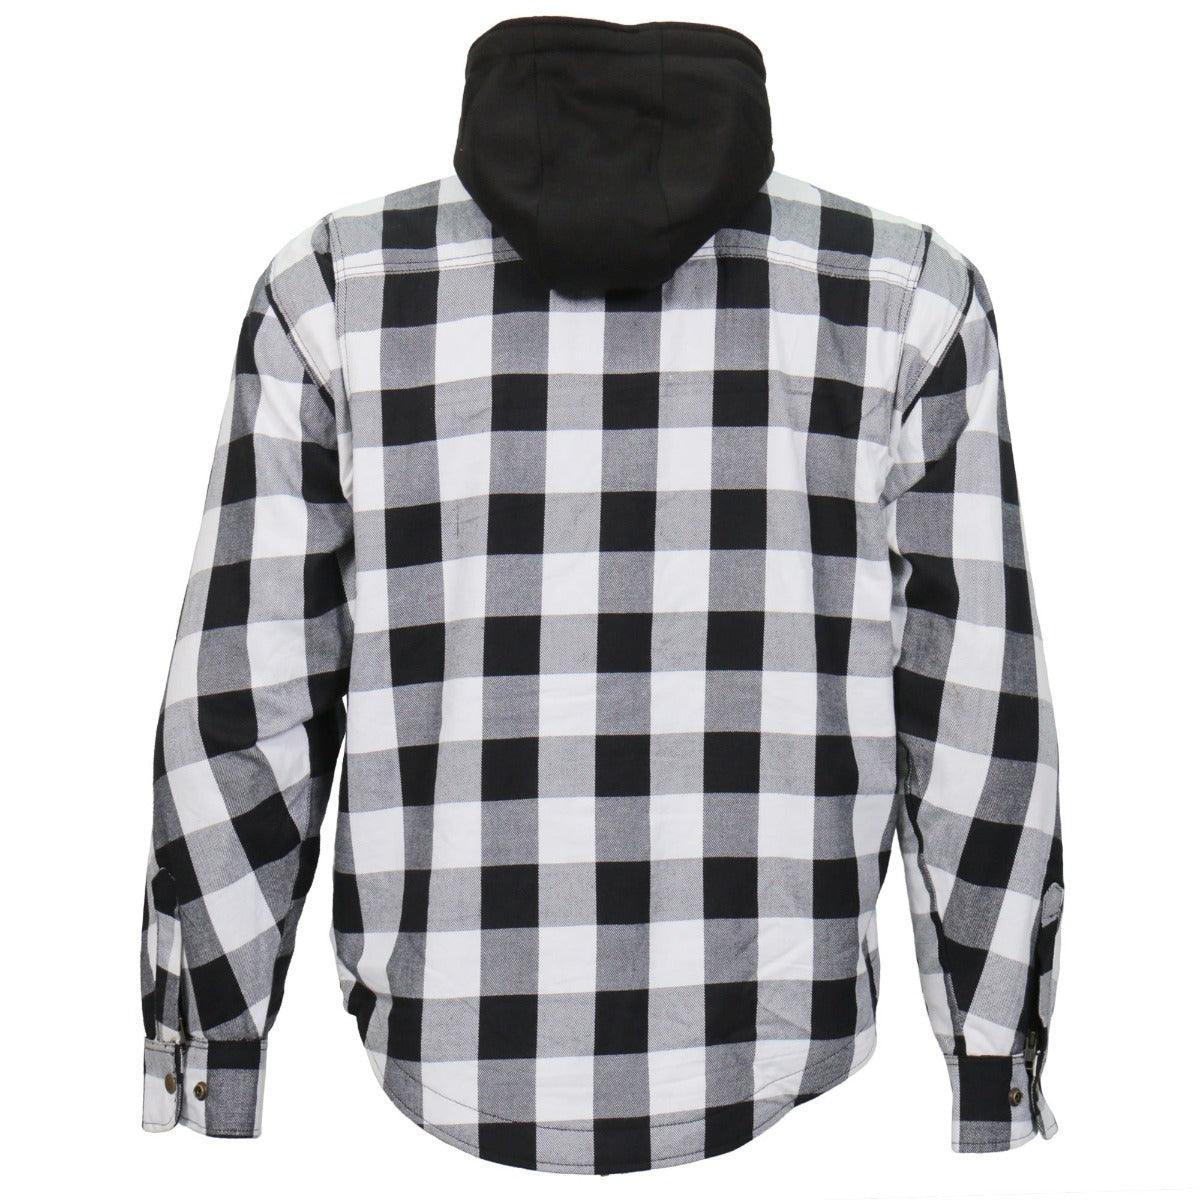 Hot Leathers Men's Black And White Hooded Armored Flannel Jacket - American Legend Rider